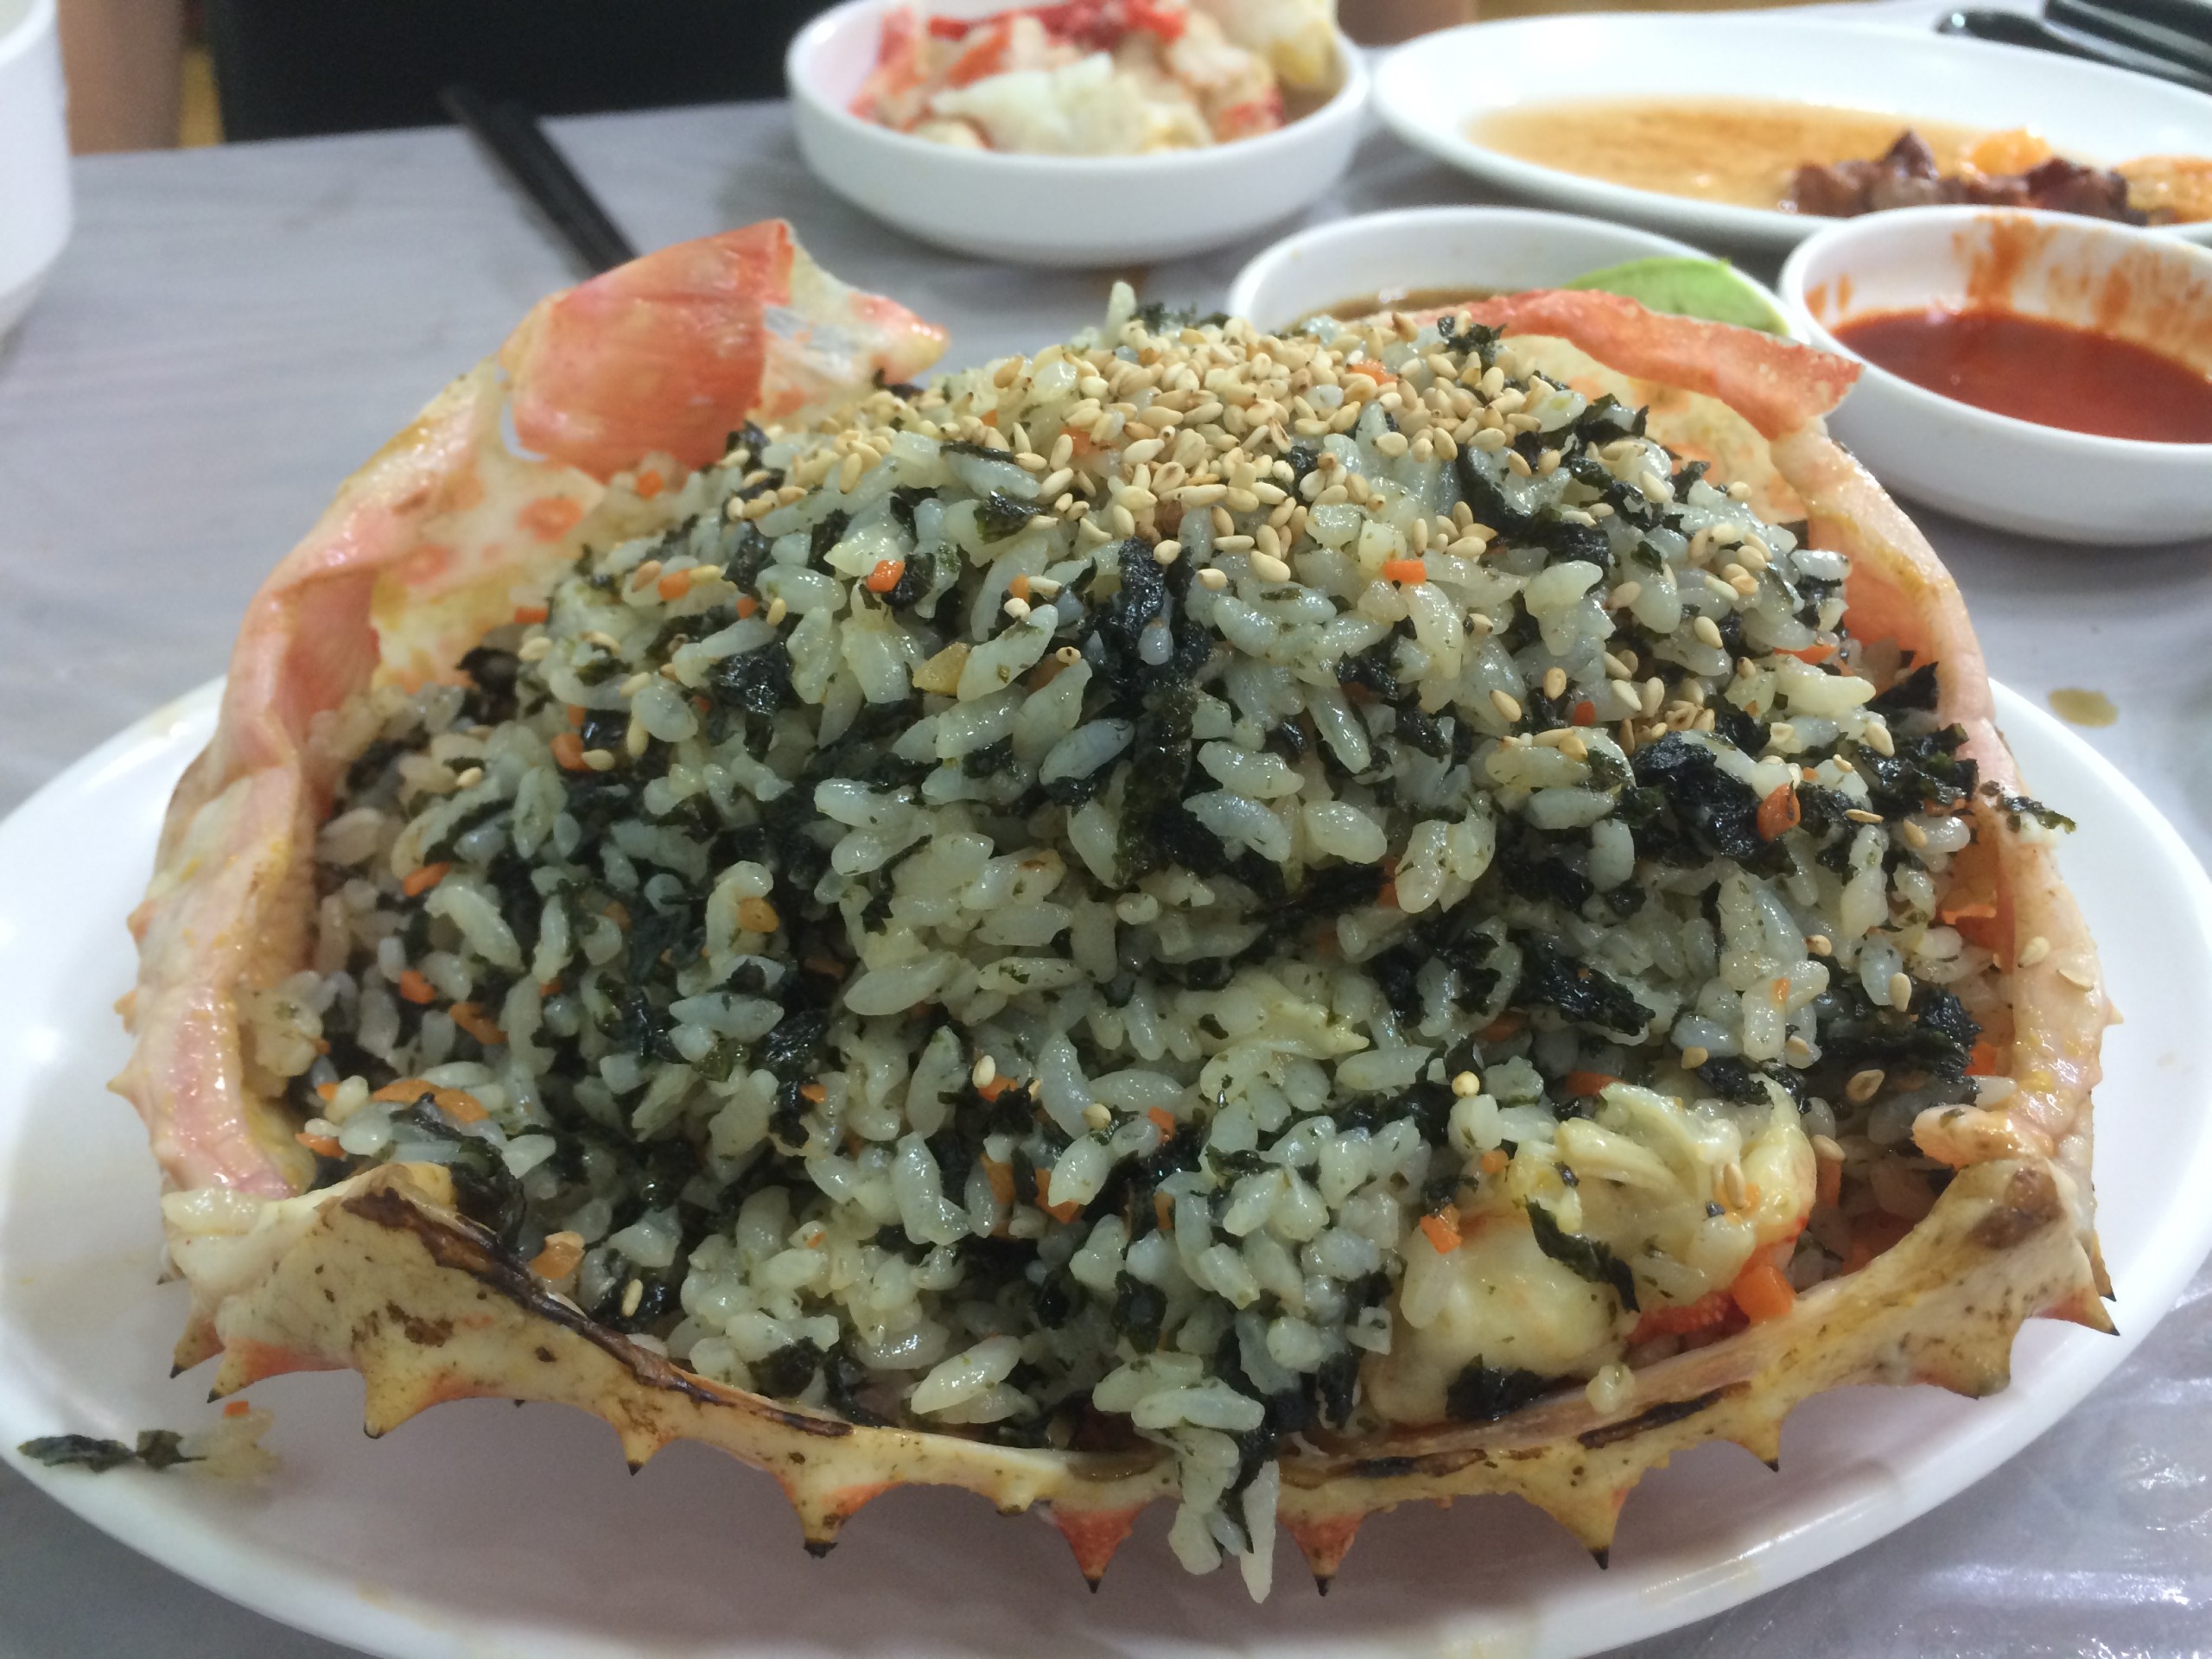 Awesome fried rice made with the king crab